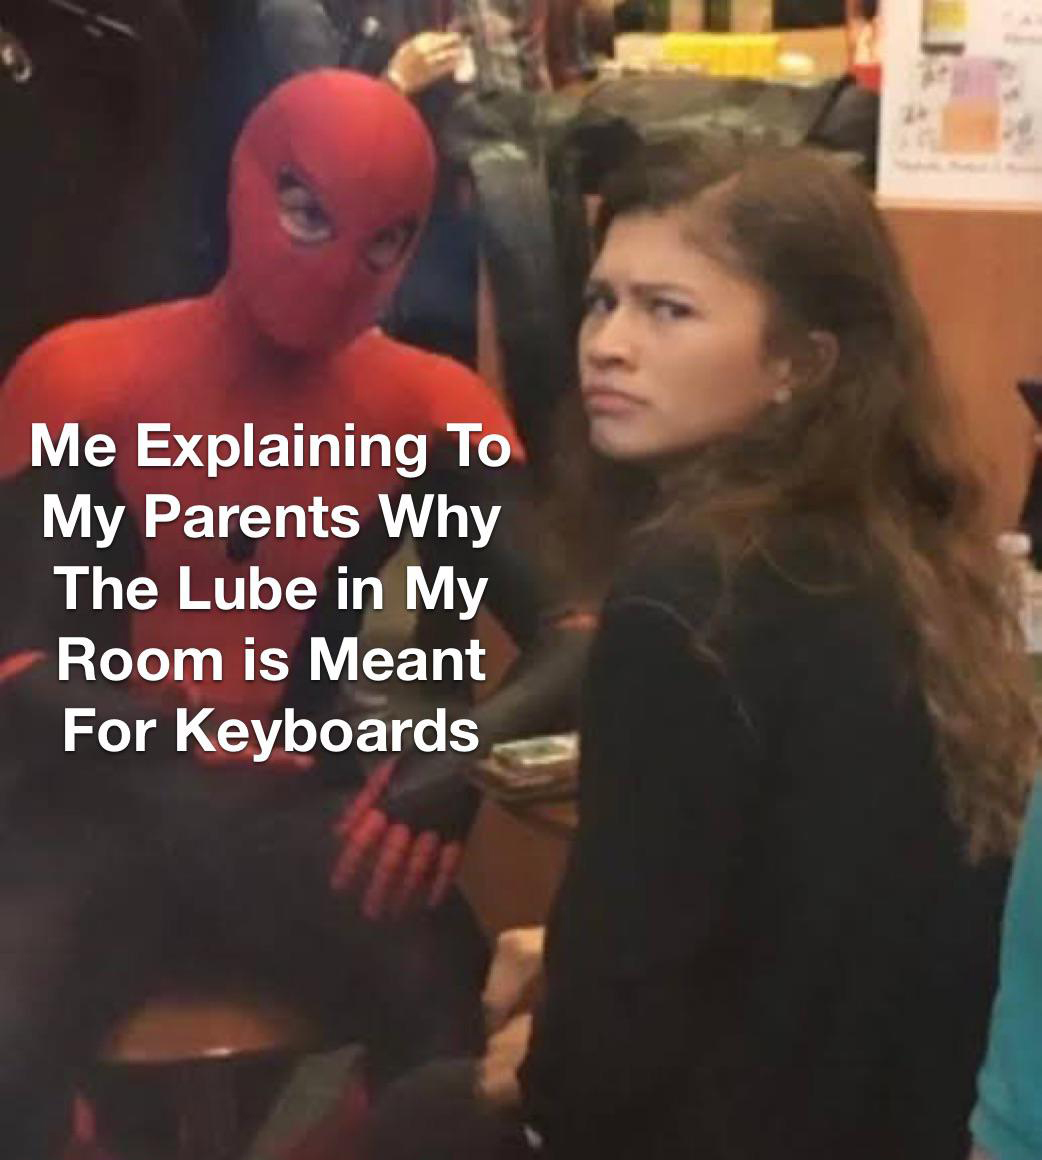 gaming memes - karen middle finger - Me Explaining To My Parents Why The Lube in My Room is Meant For Keyboards